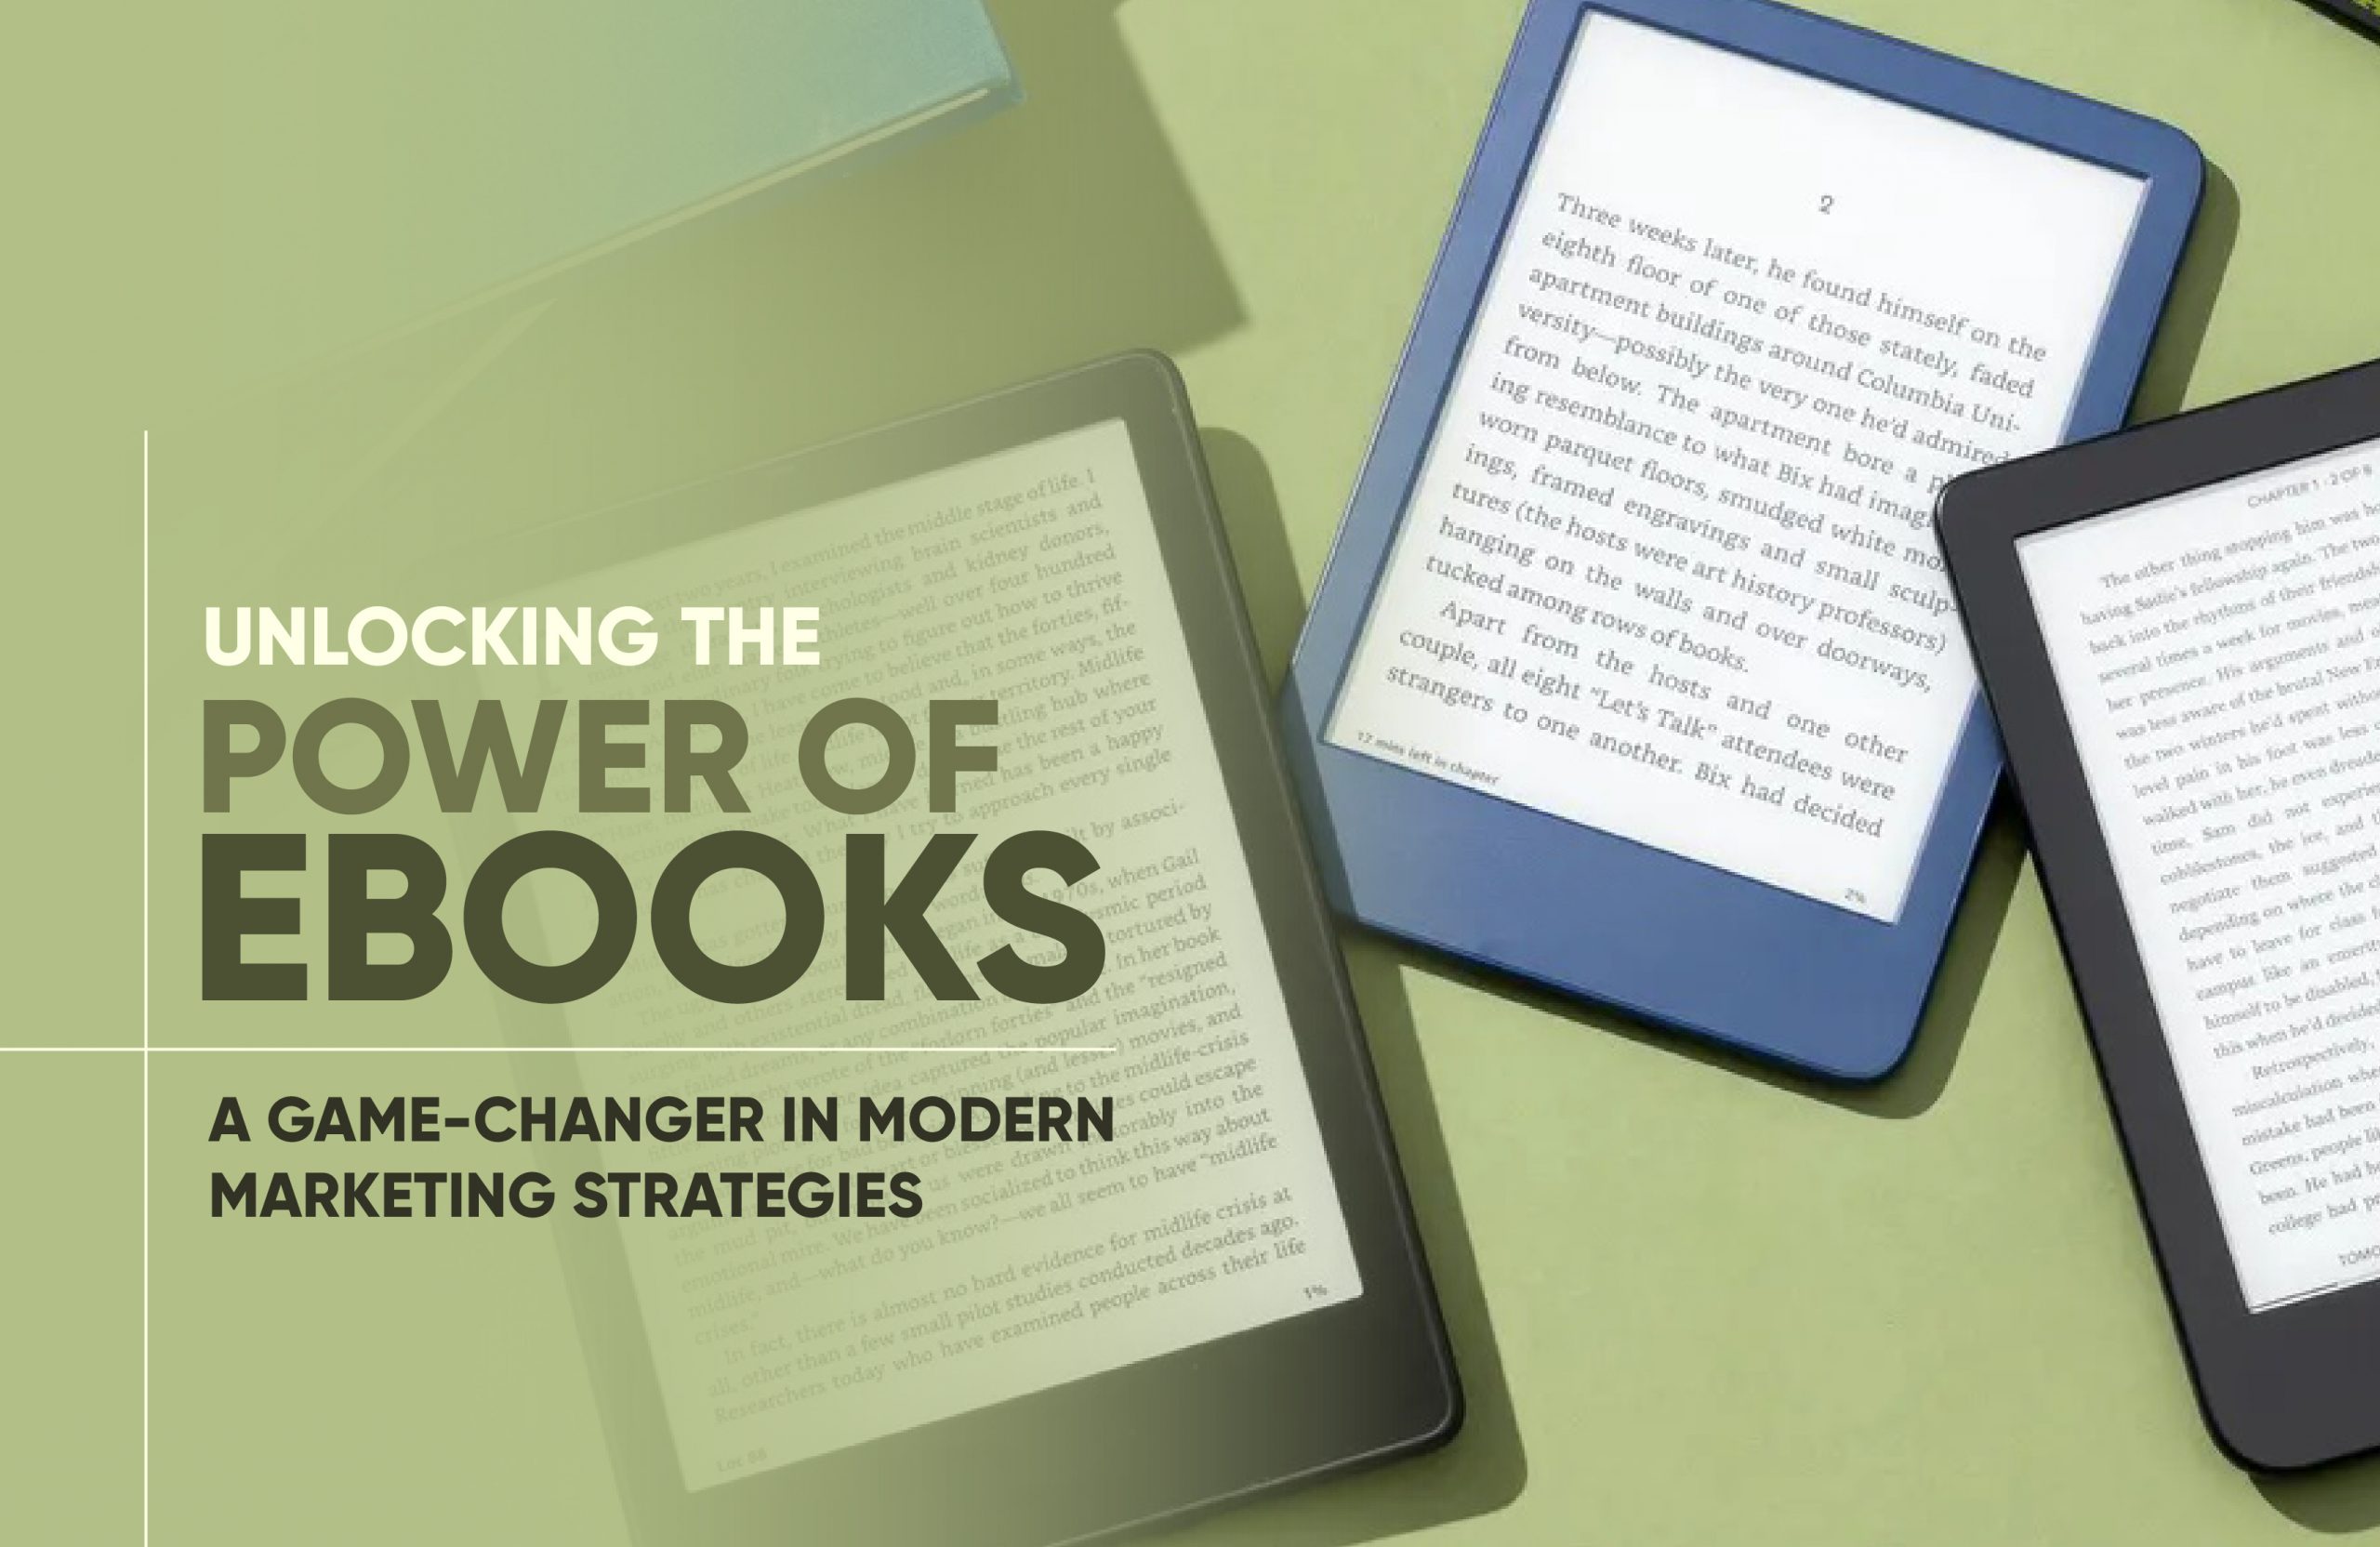 The Power of Ebooks: A Game-Changer in Marketing Strategies